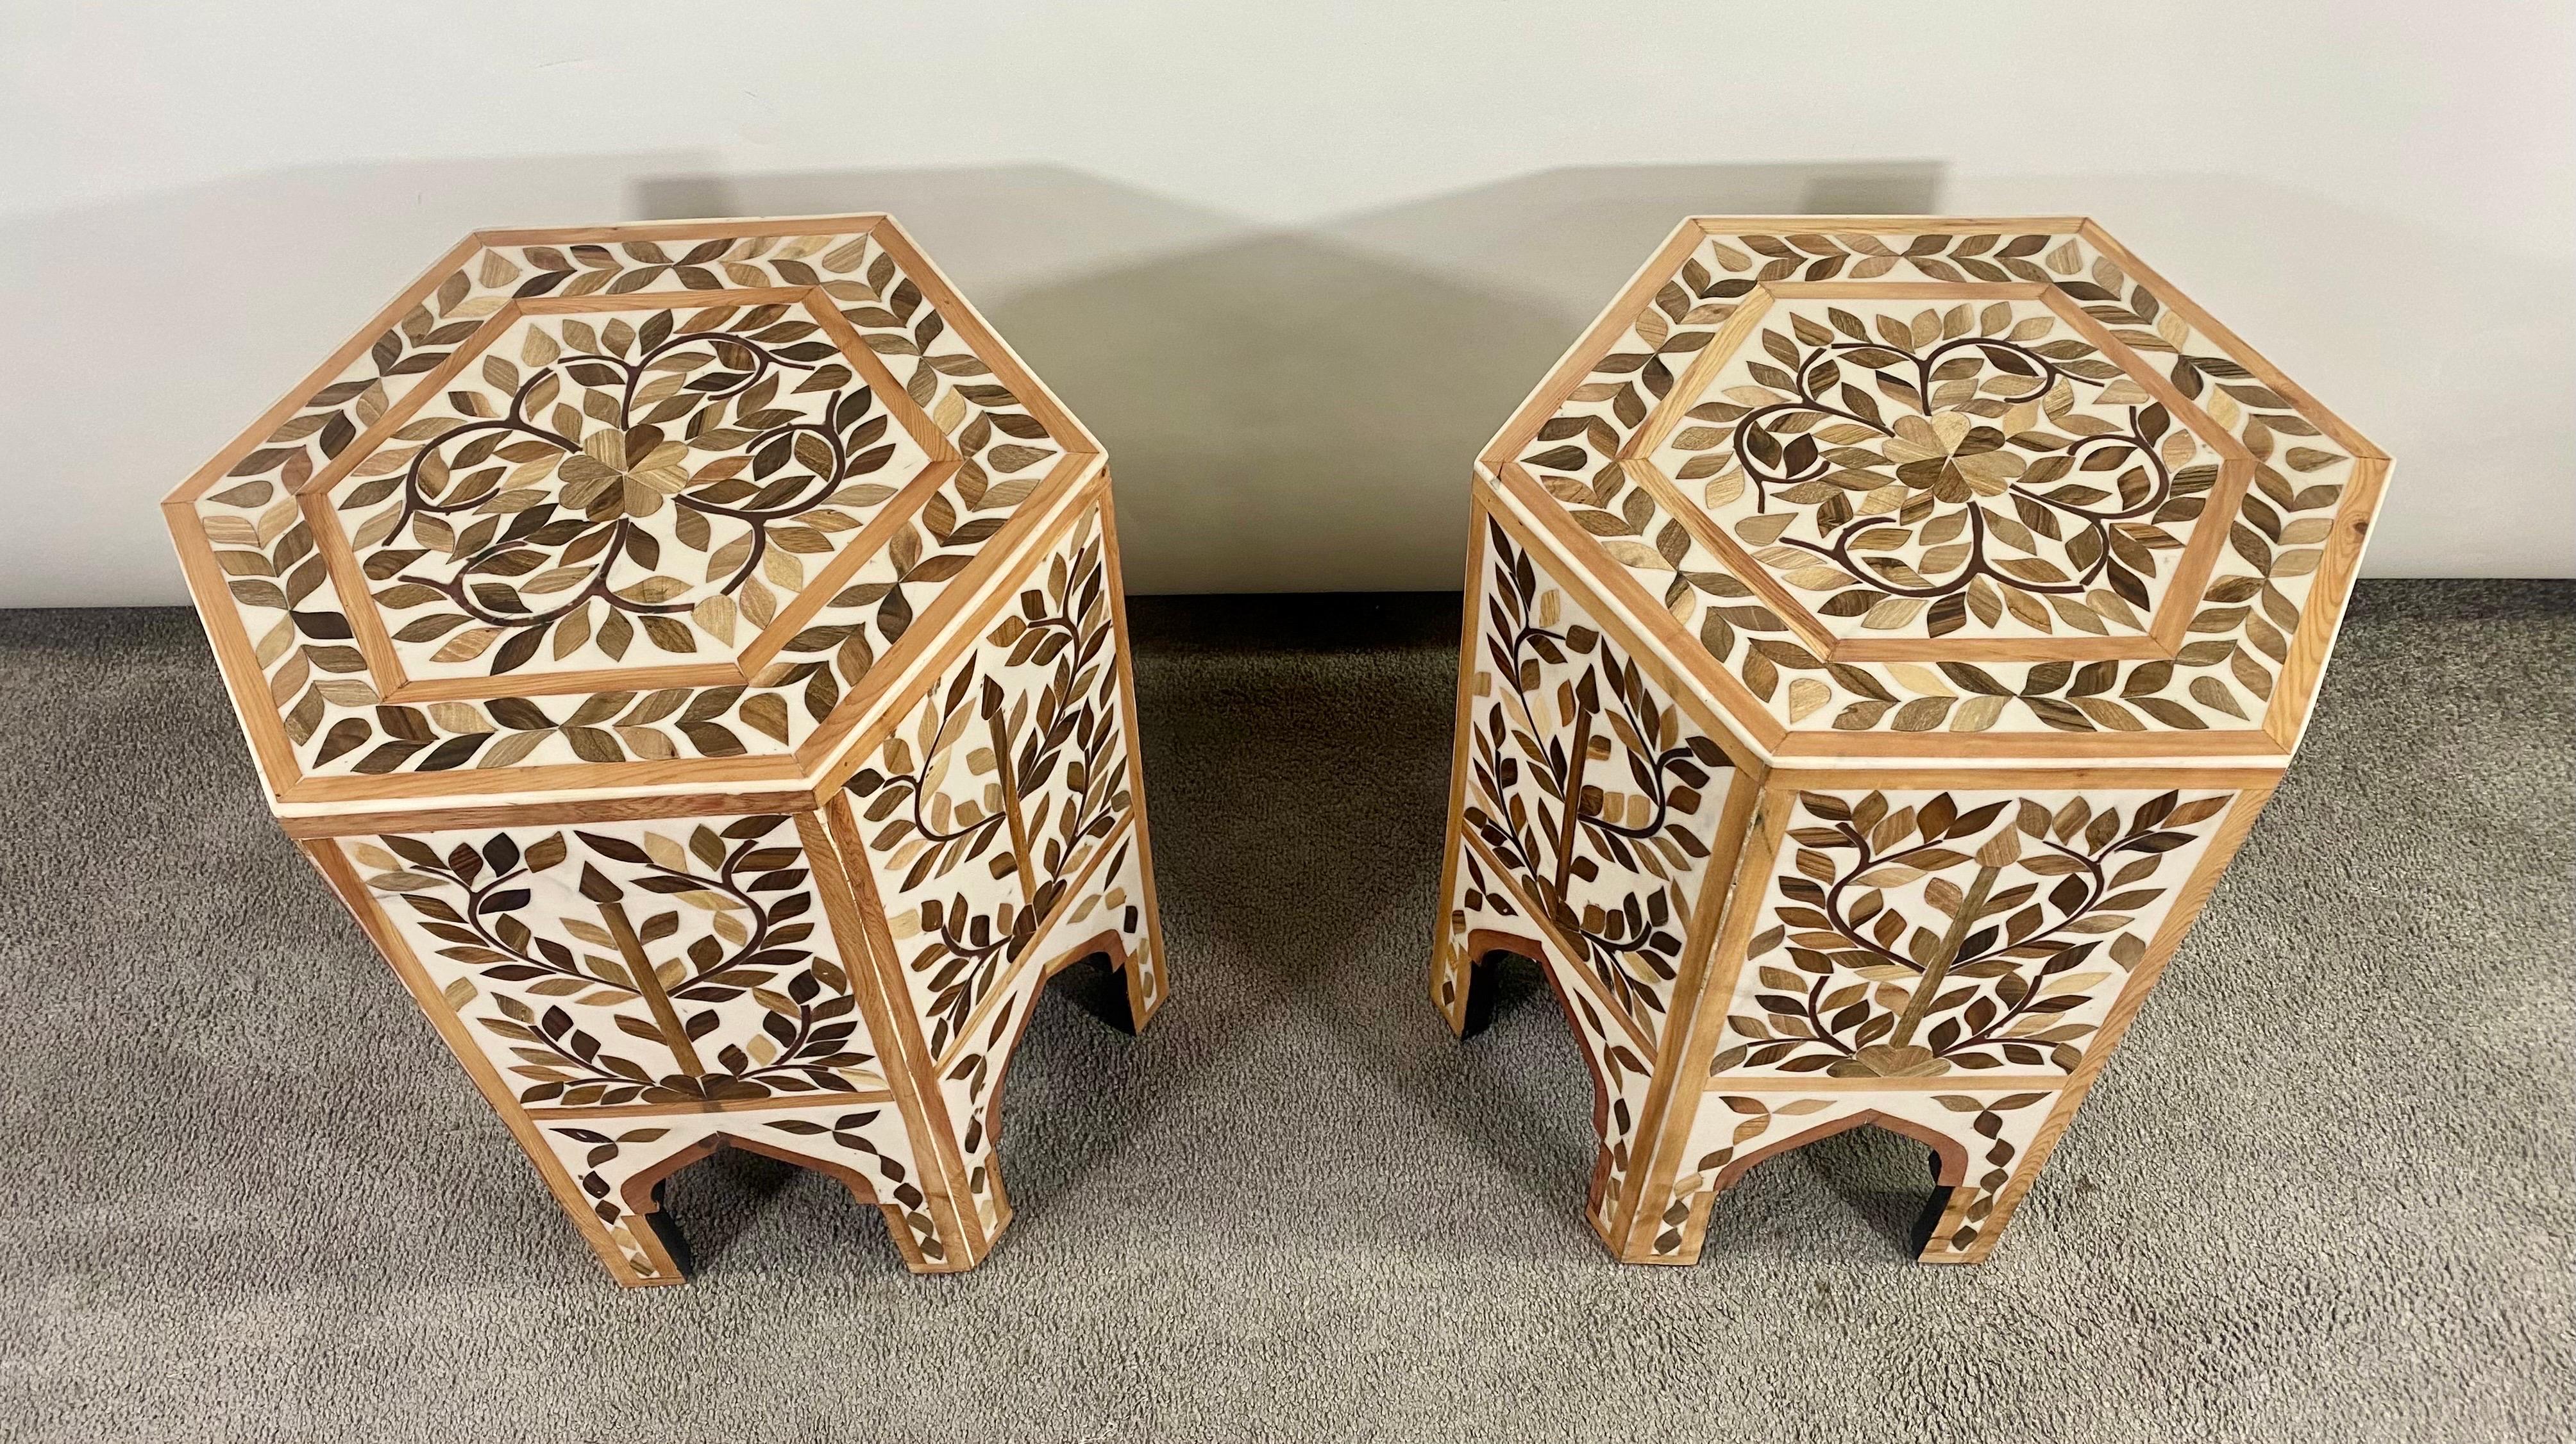 An exquisite pair of boho chic / Bohemian Moroccan style side or end table featuring an hexagonal shape. The handmade tables are finely decorated in leaves Pattern and beautiful arches, a staple of the Moorish timeless architecture and design.